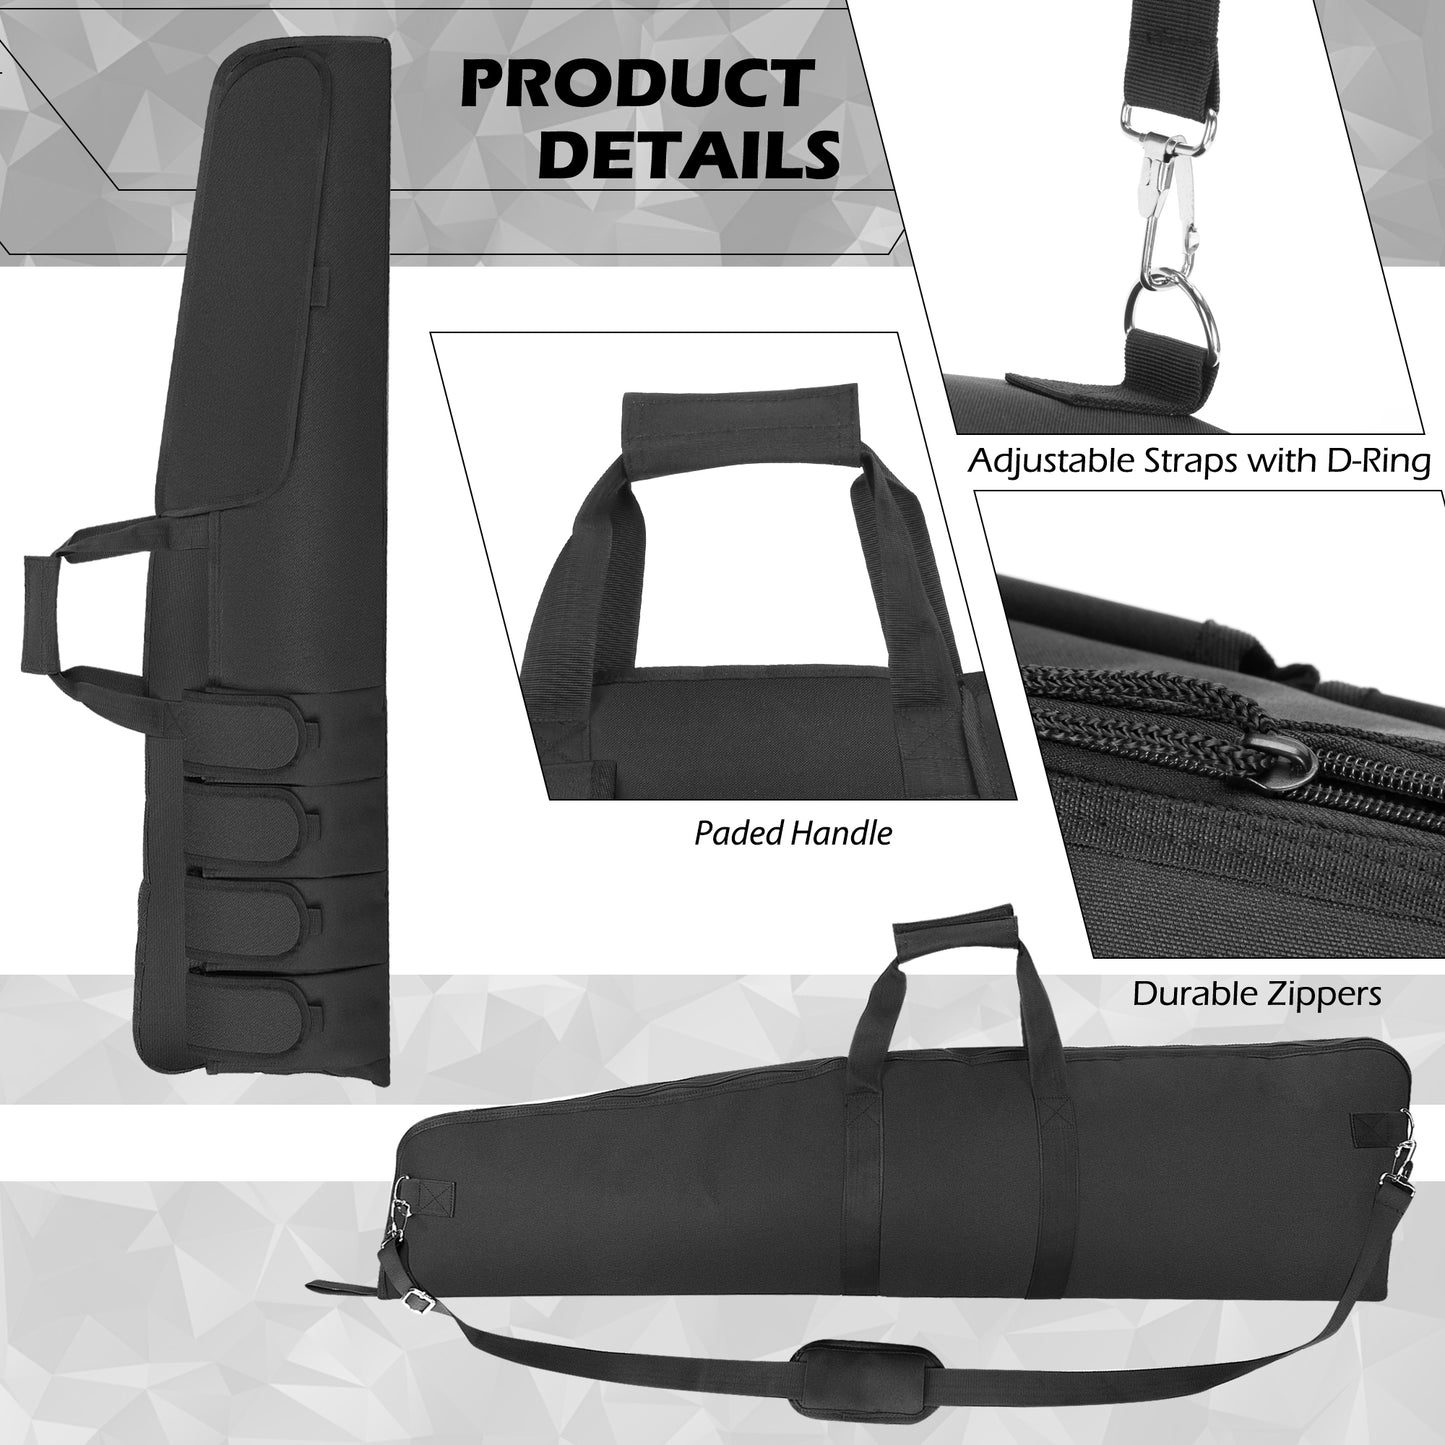 Gun Bag for Rifles, Padded Adjustable Rifle Carrying Case with Extra Pockets and Security Features GBRB003